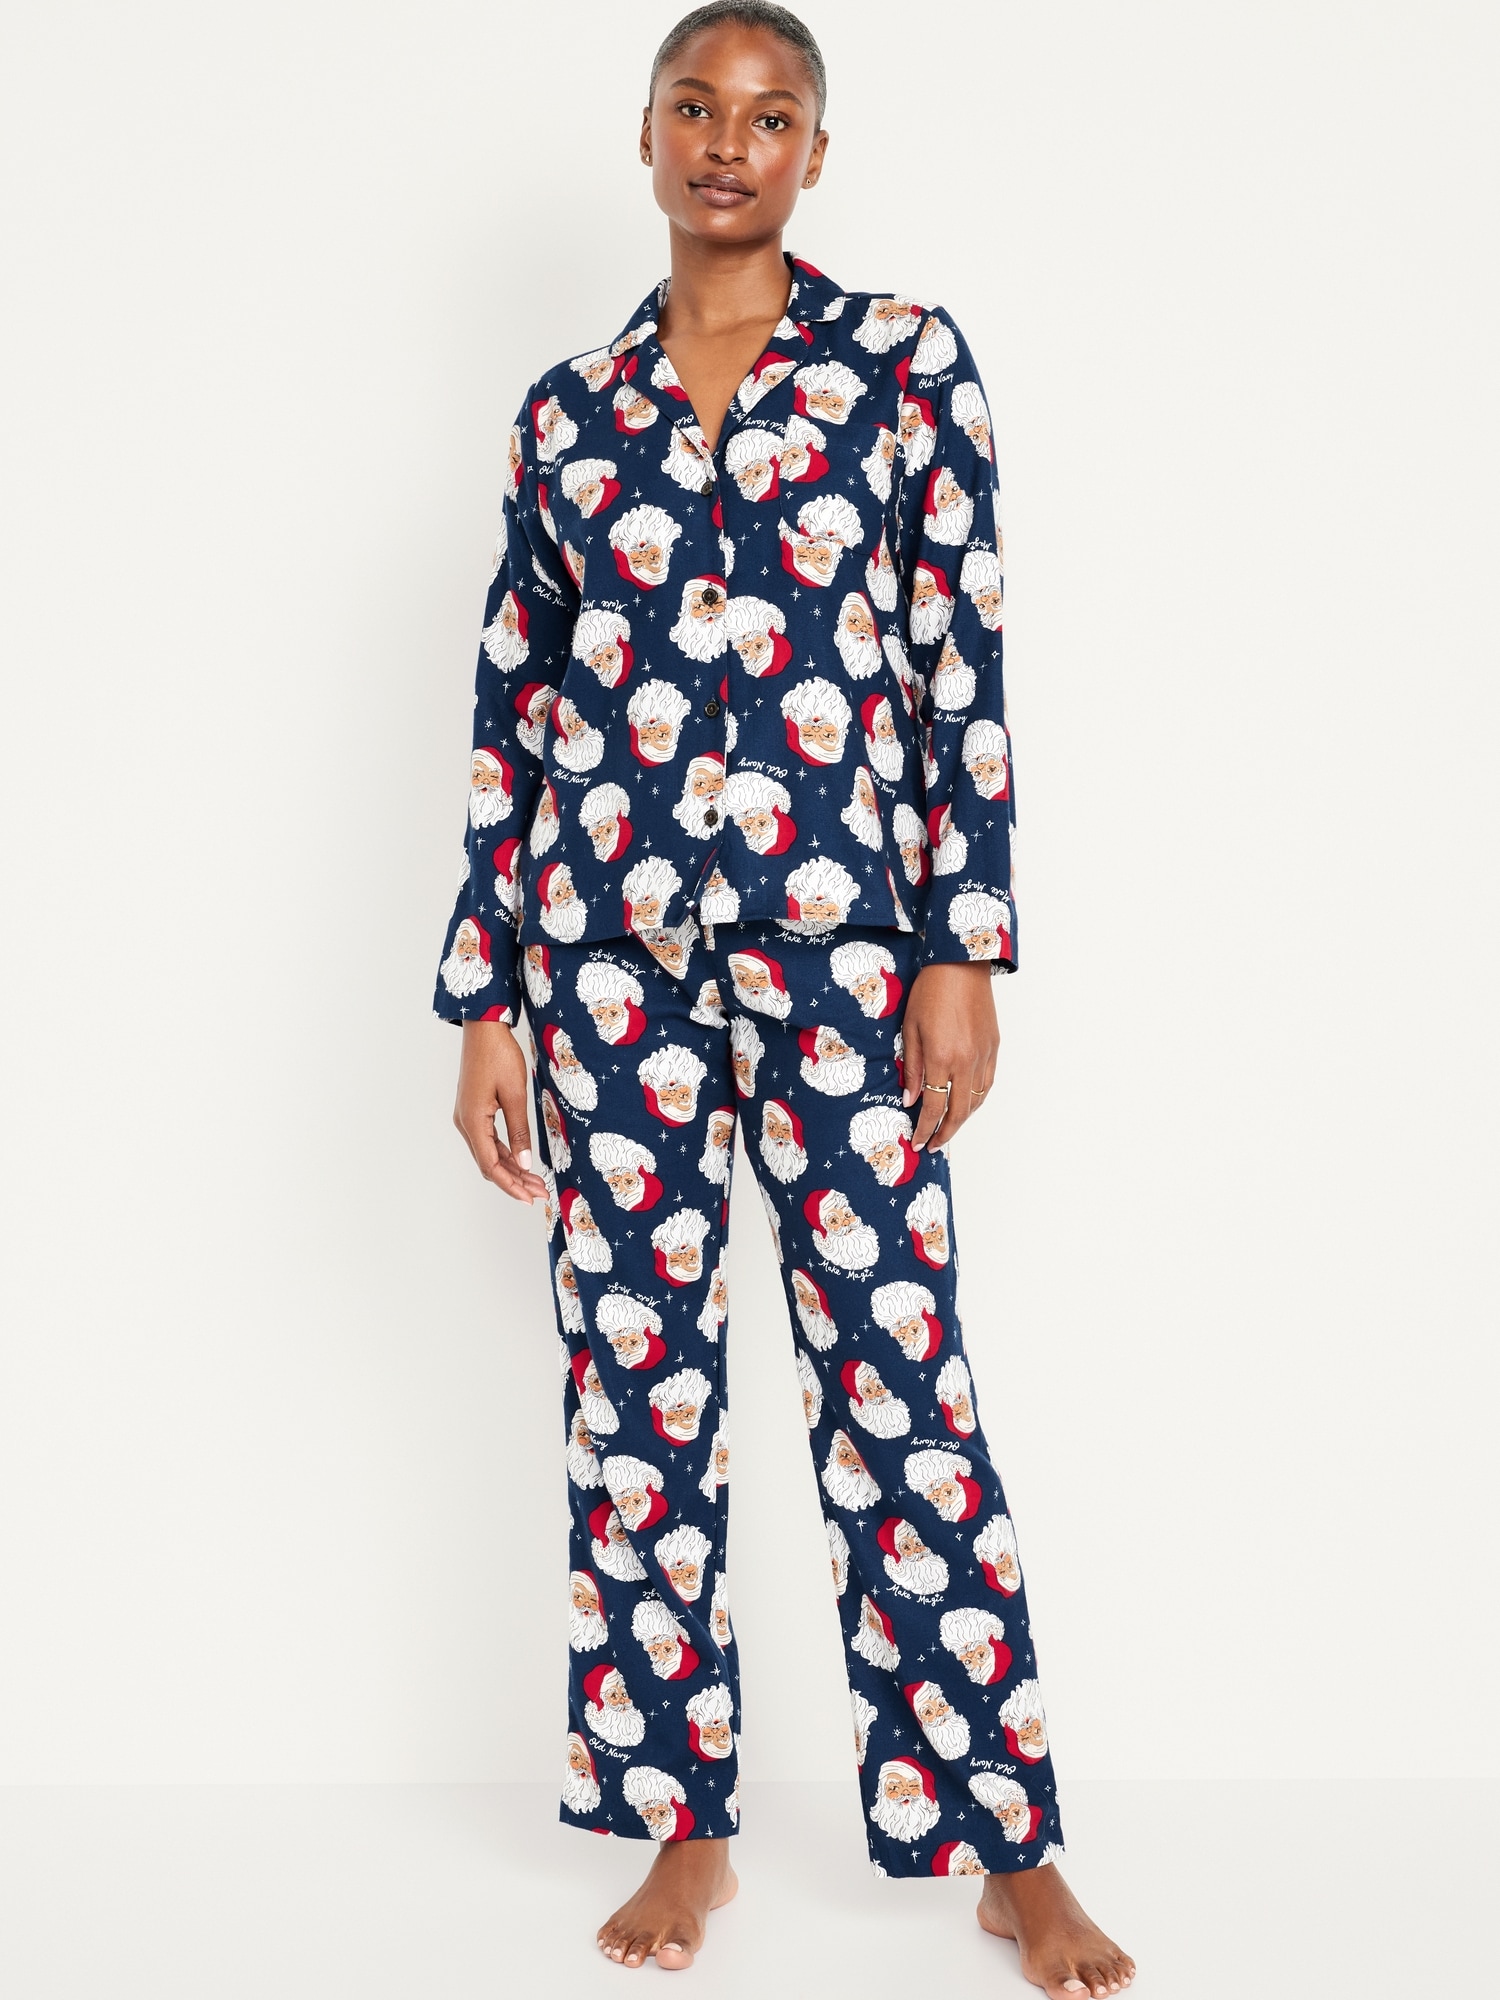 Old Navy Matching Flannel Pajama Set for Women Red Buffalo Plaid